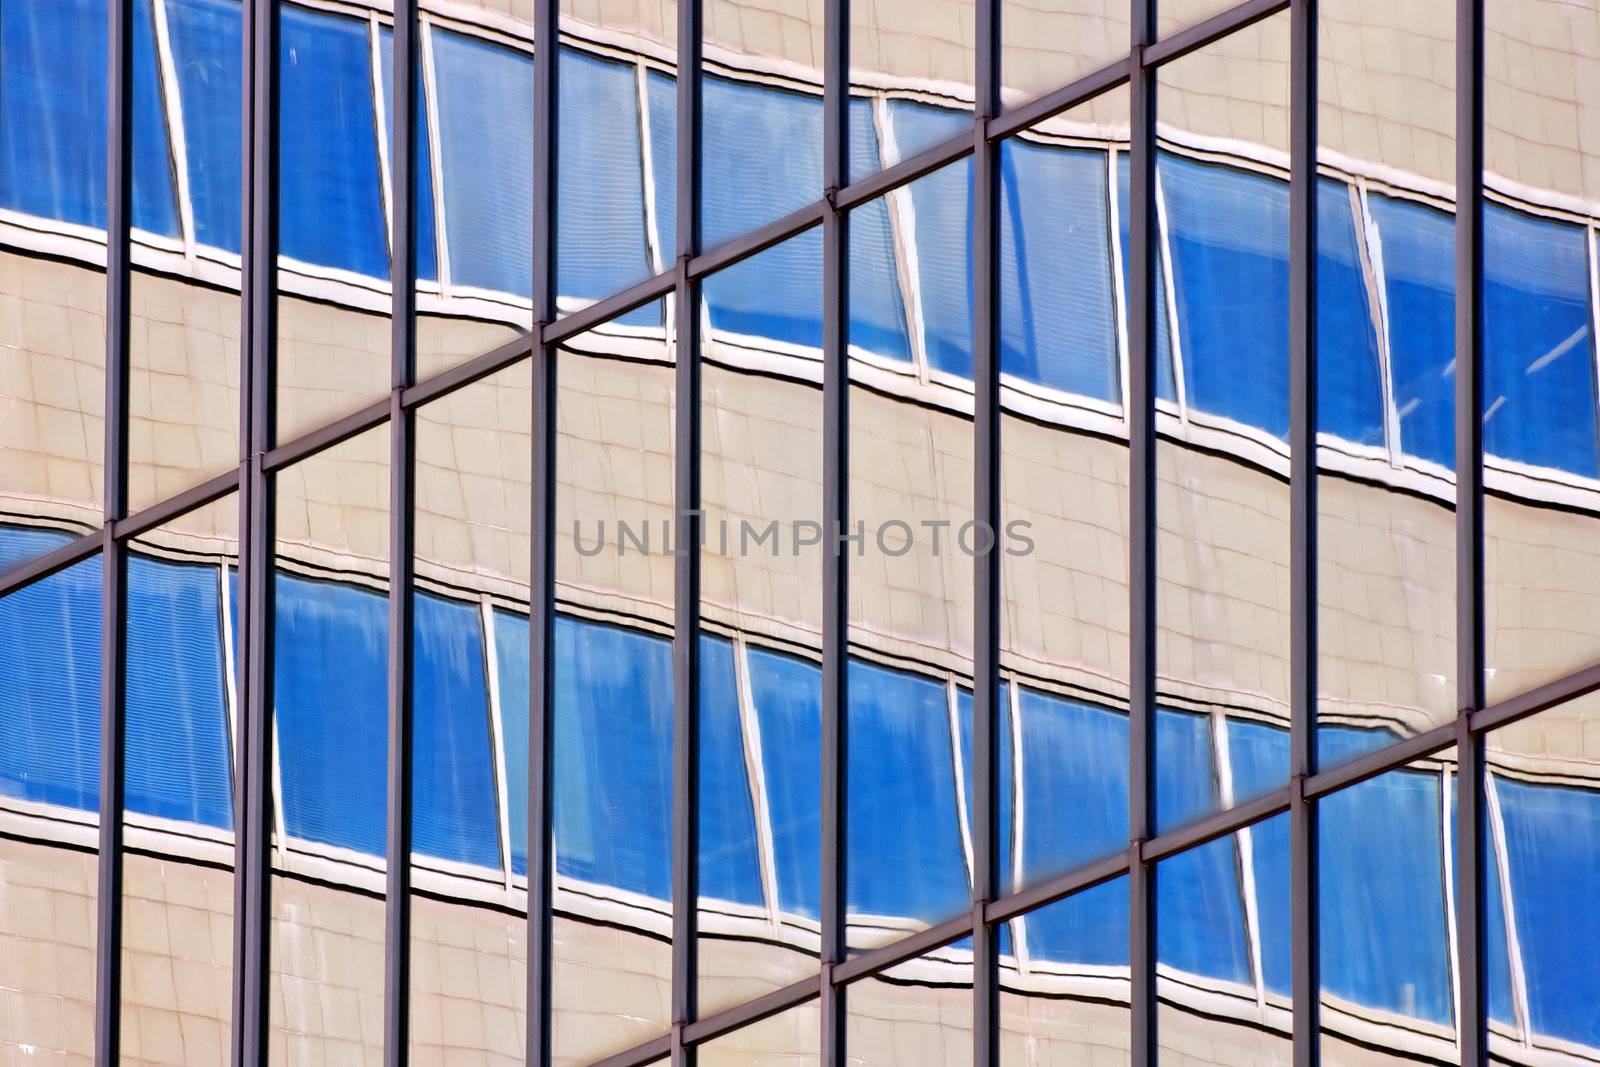 Building reflected in the glasses of another building